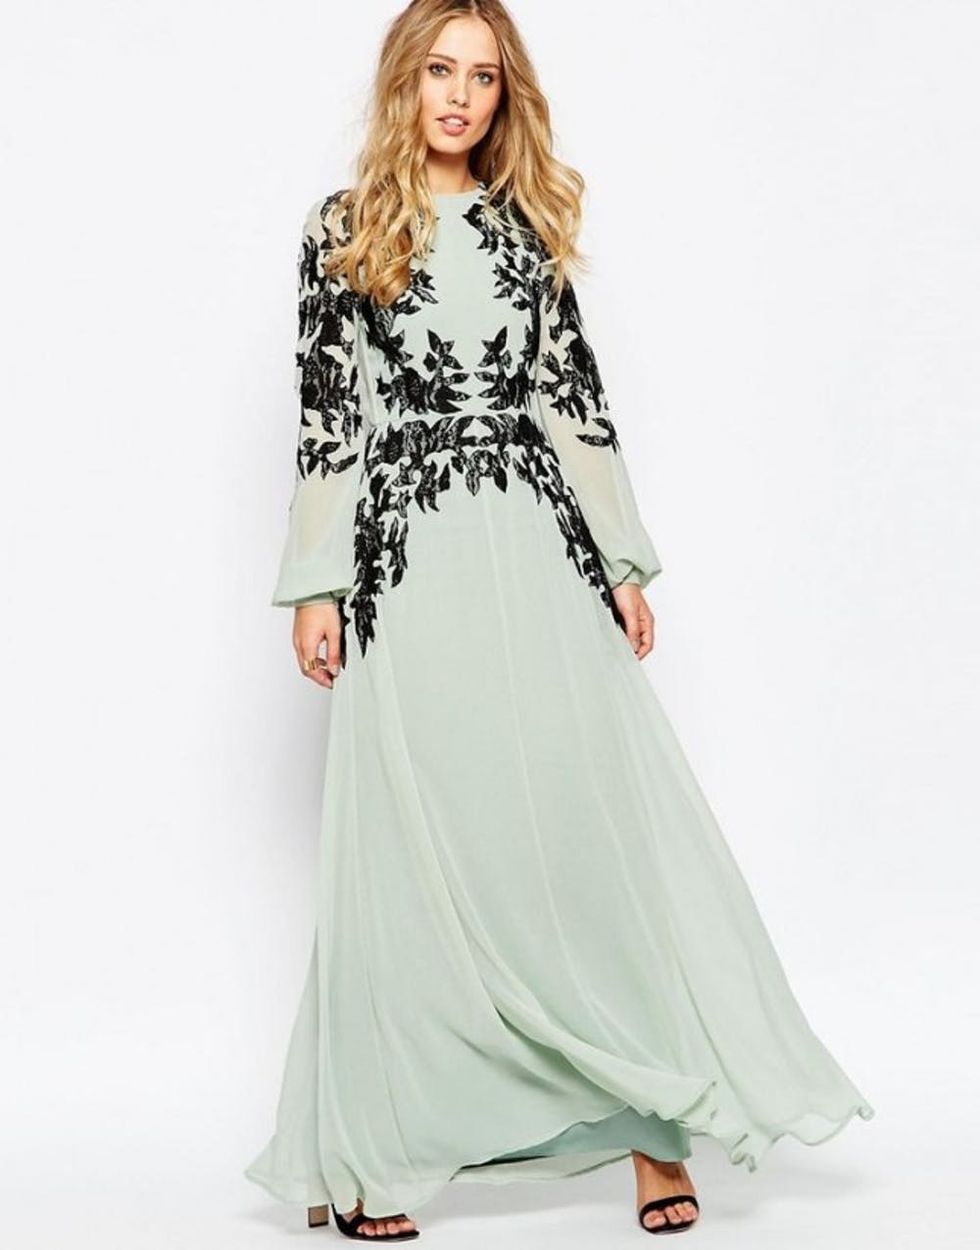 15 Stunning Dresses to Wear to a Winter Wedding - Brit + Co